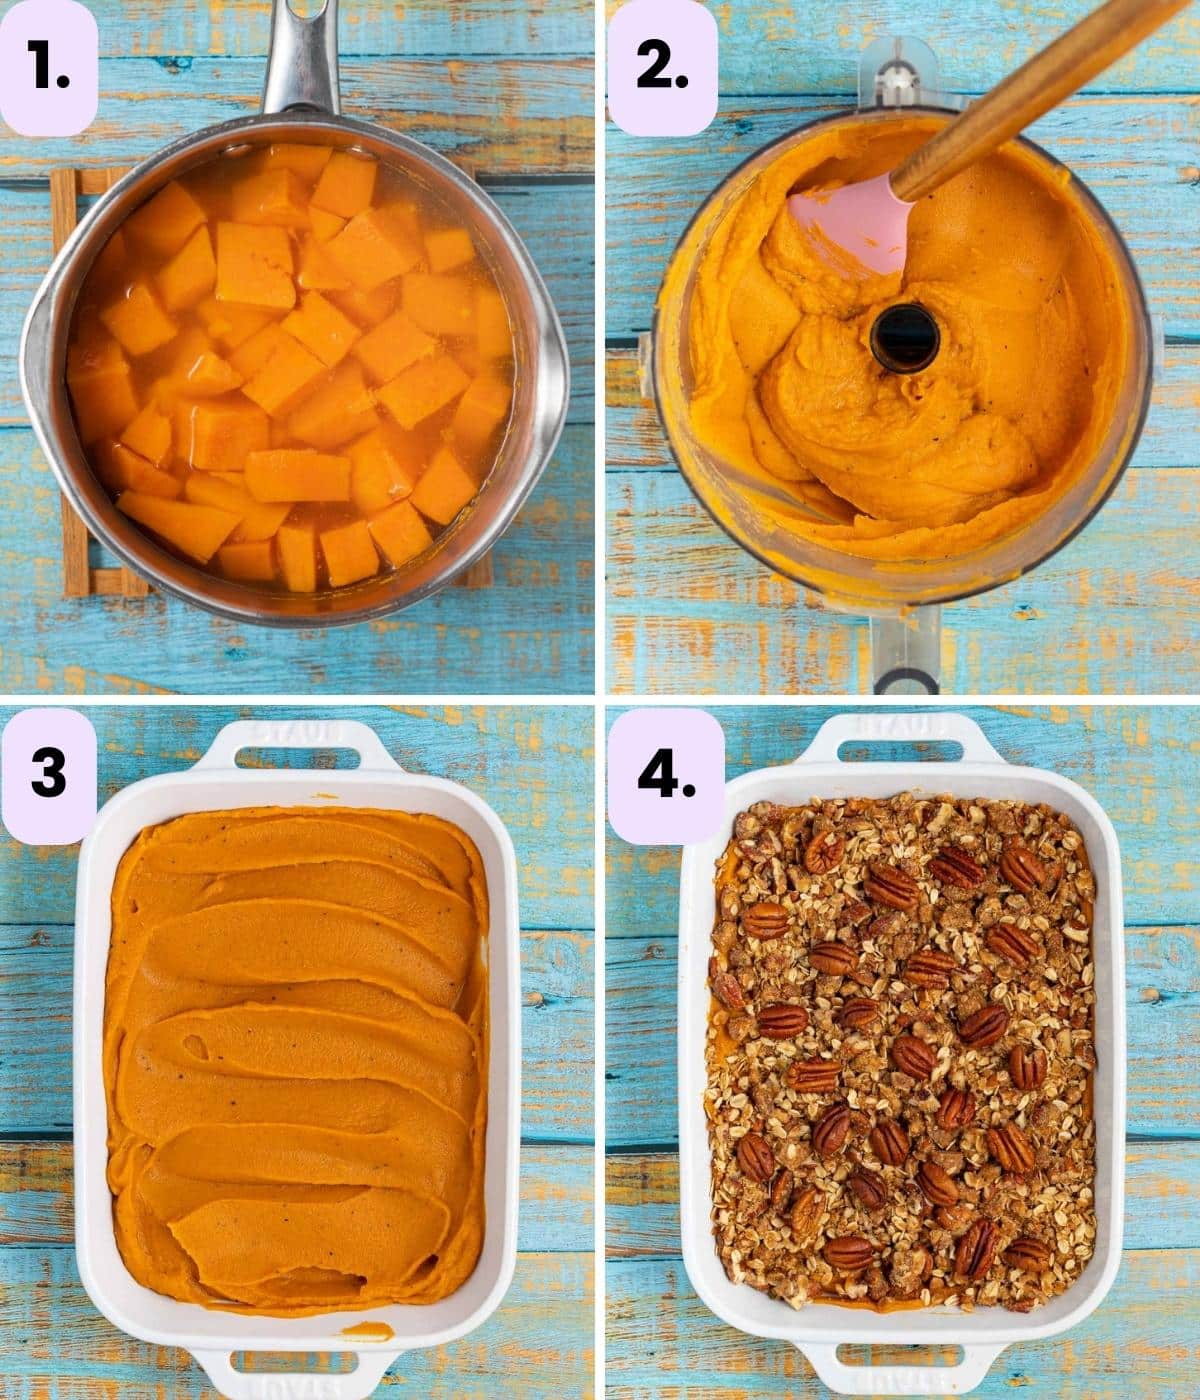 how to make sweet potato casserole step by step as per the written instructions